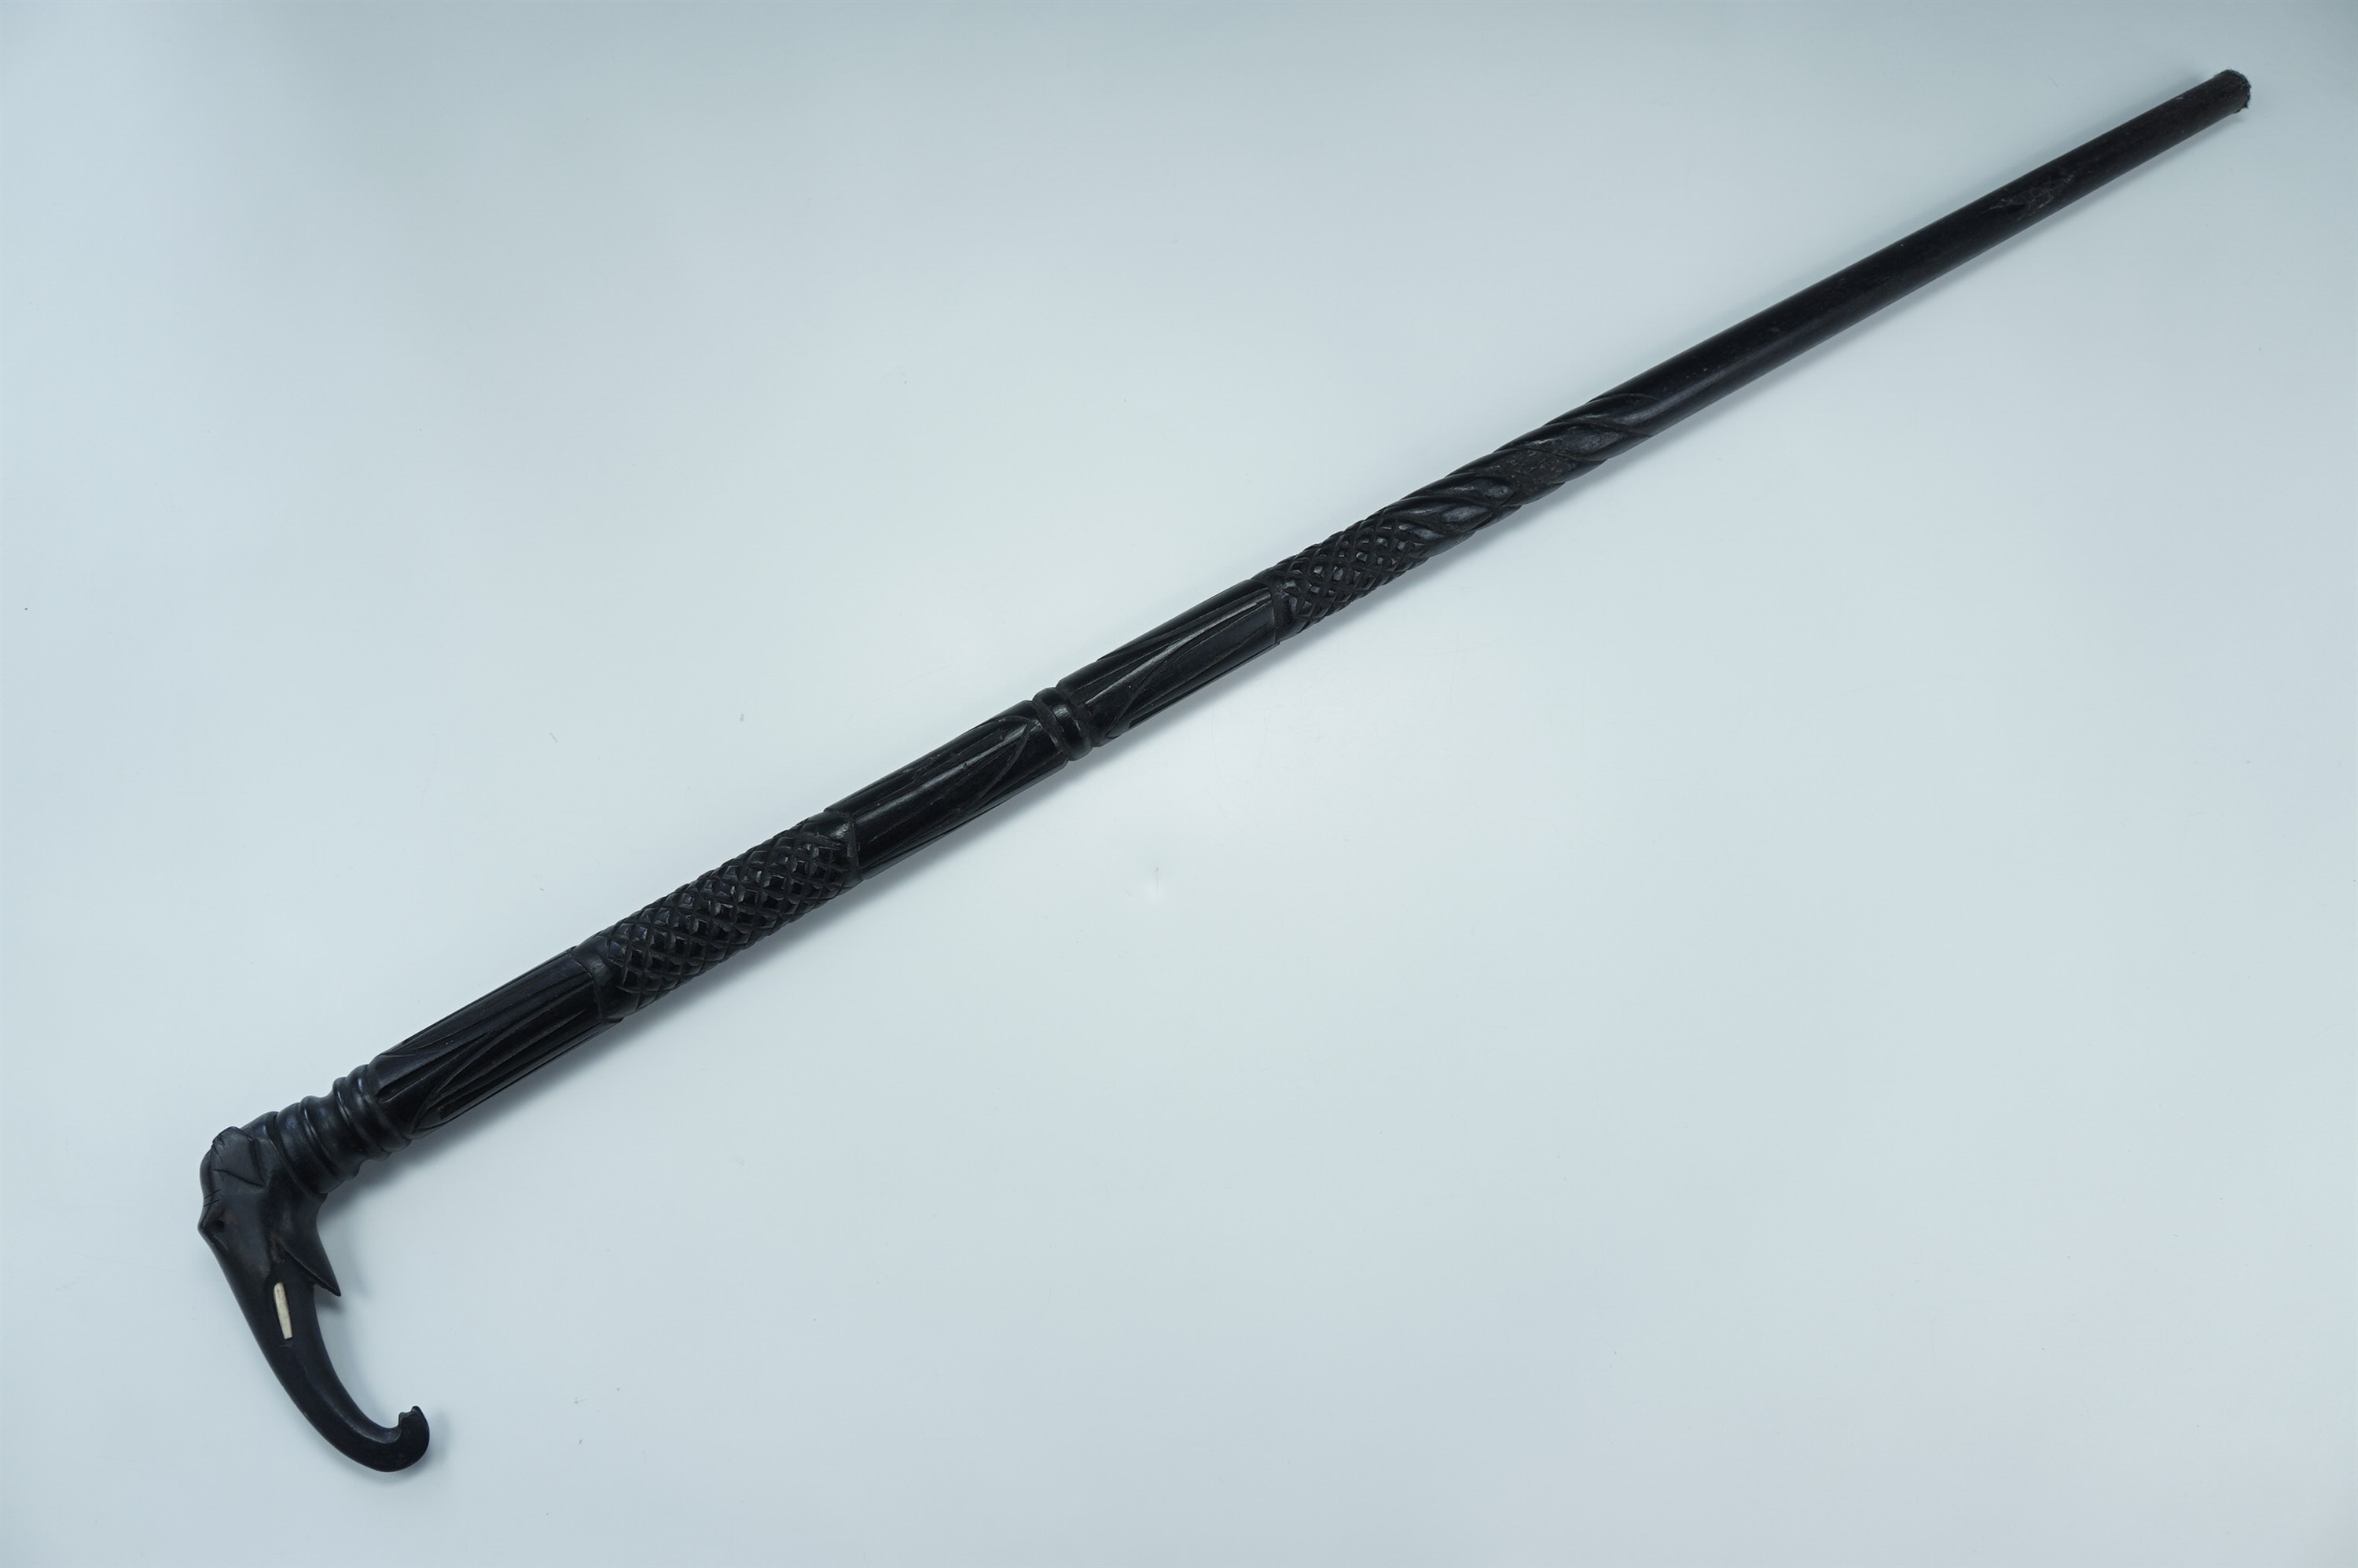 An Anglo-Indian carved ebony walking cane, its handle in the form of an elephant's head, 83 cm